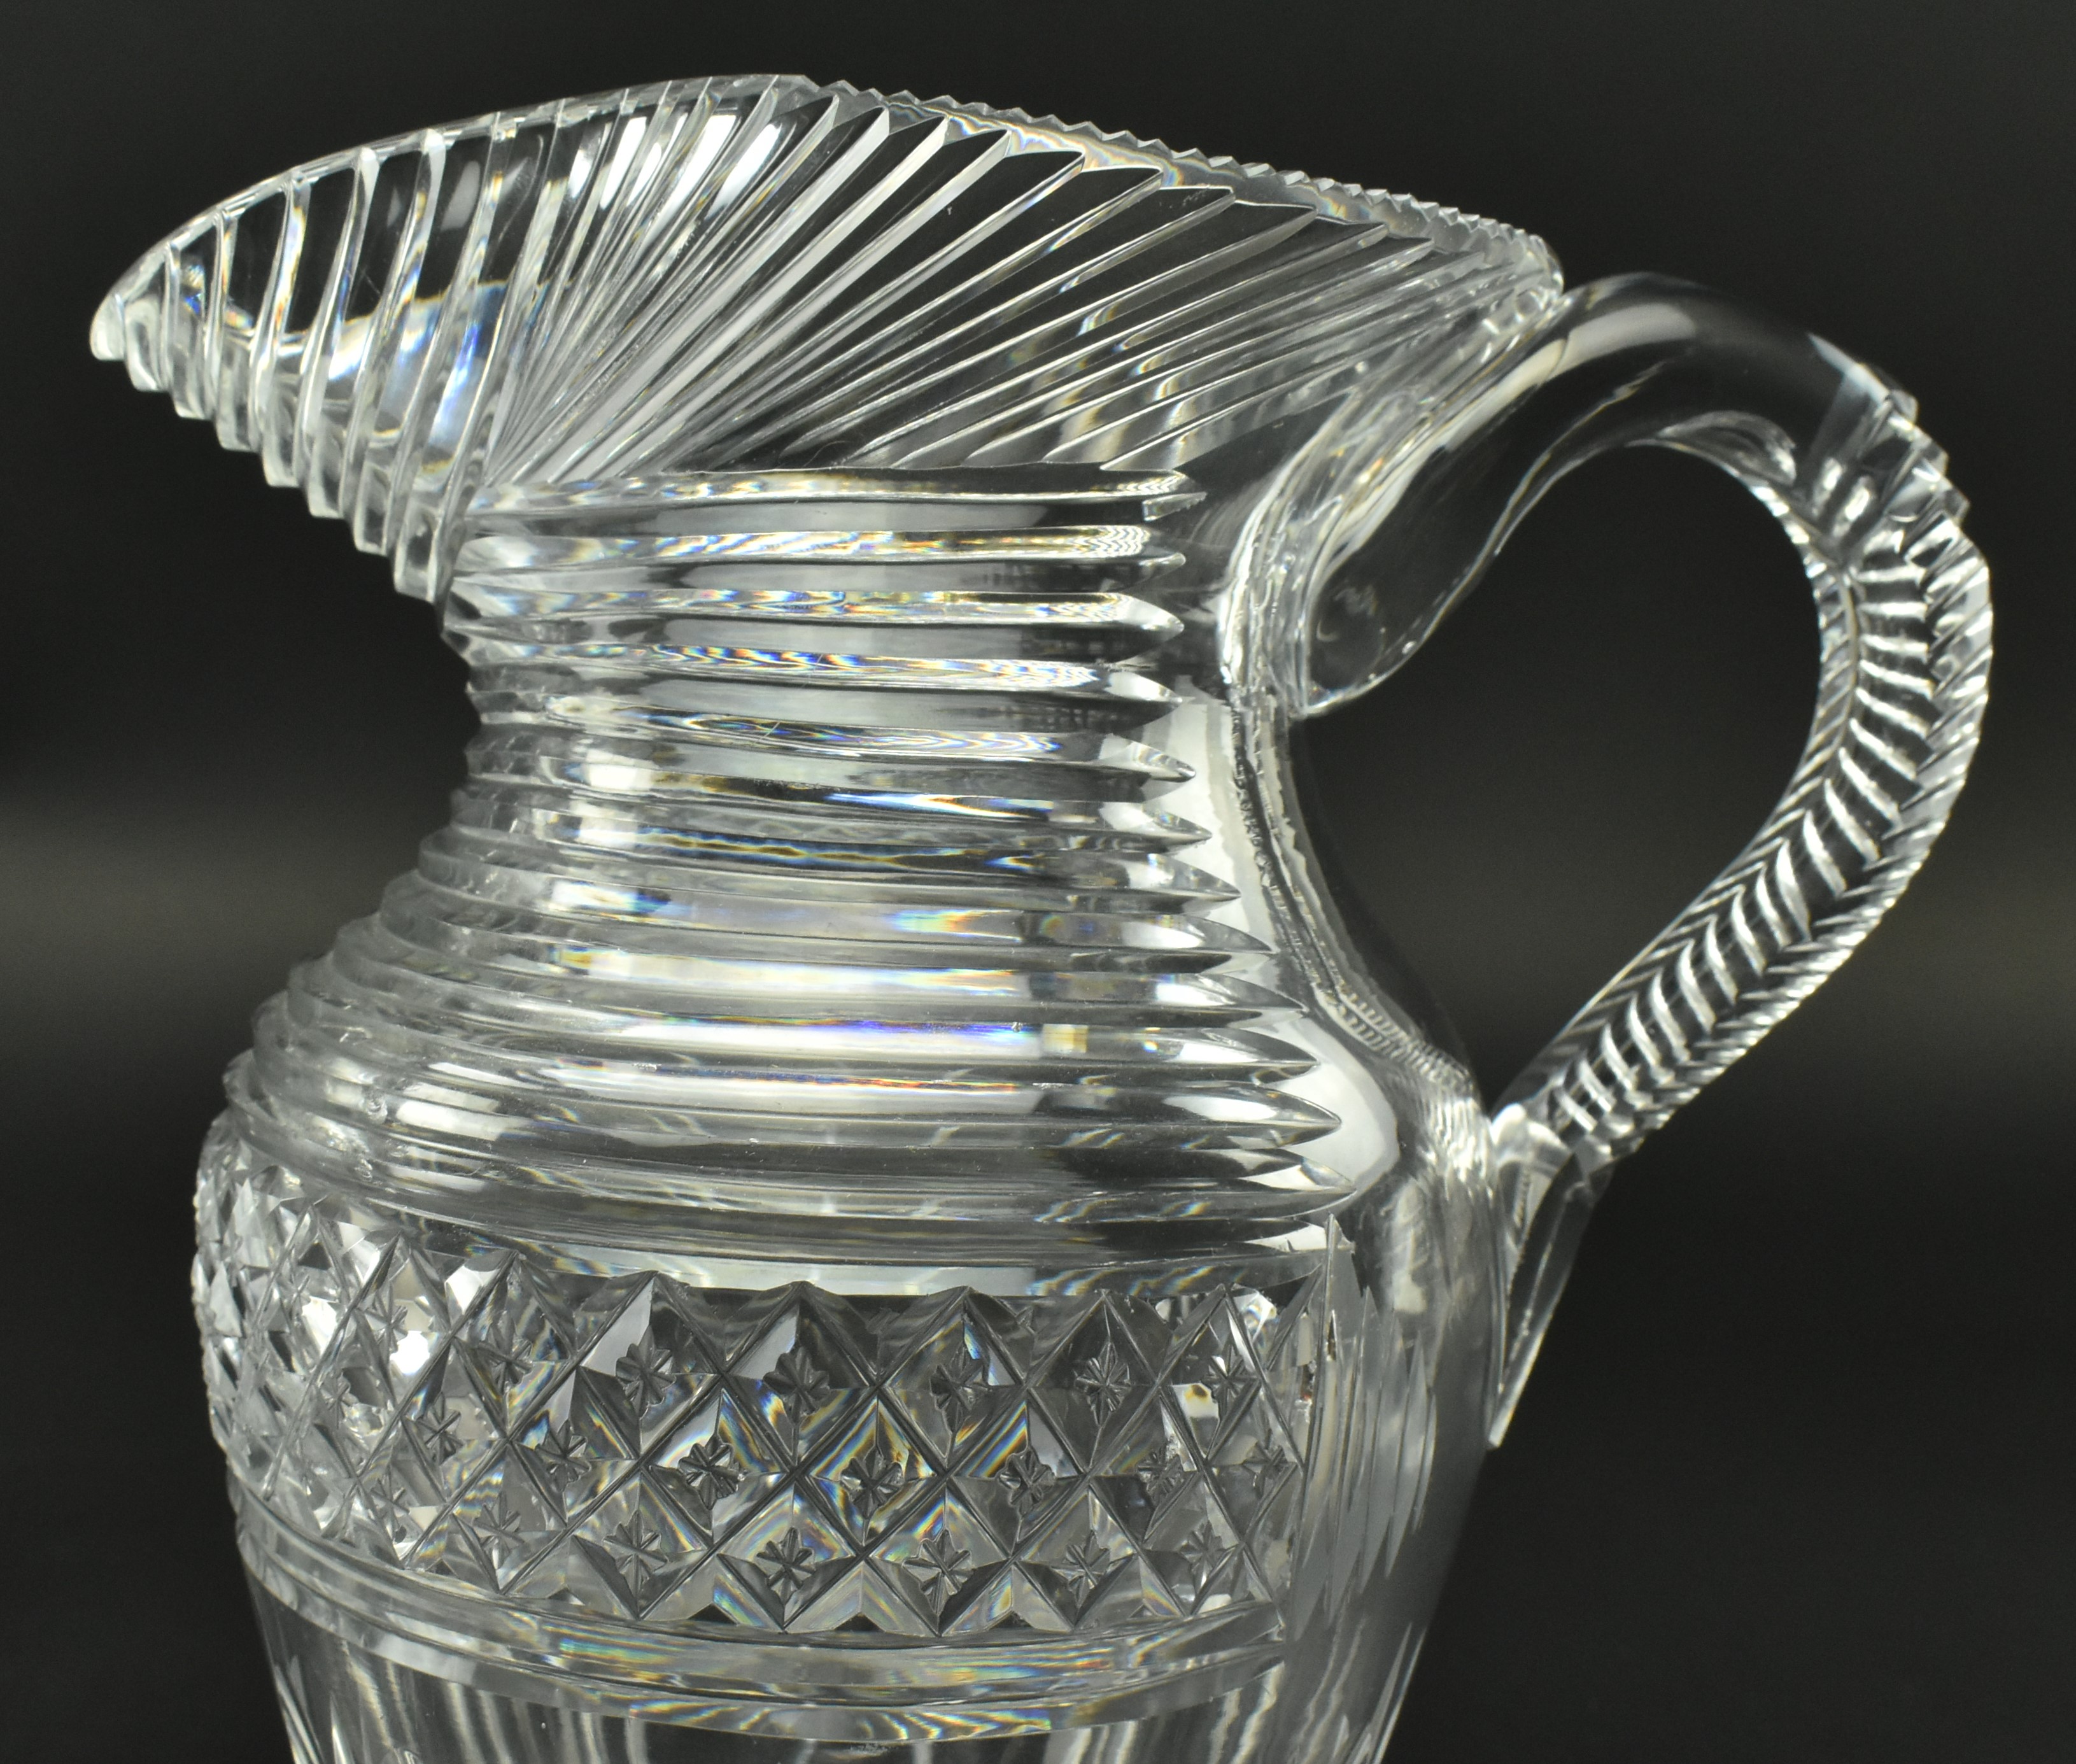 FOUR EARLY 19TH CENTURY GLASS JUGS WITH STEP CUT DESIGN - Image 5 of 11